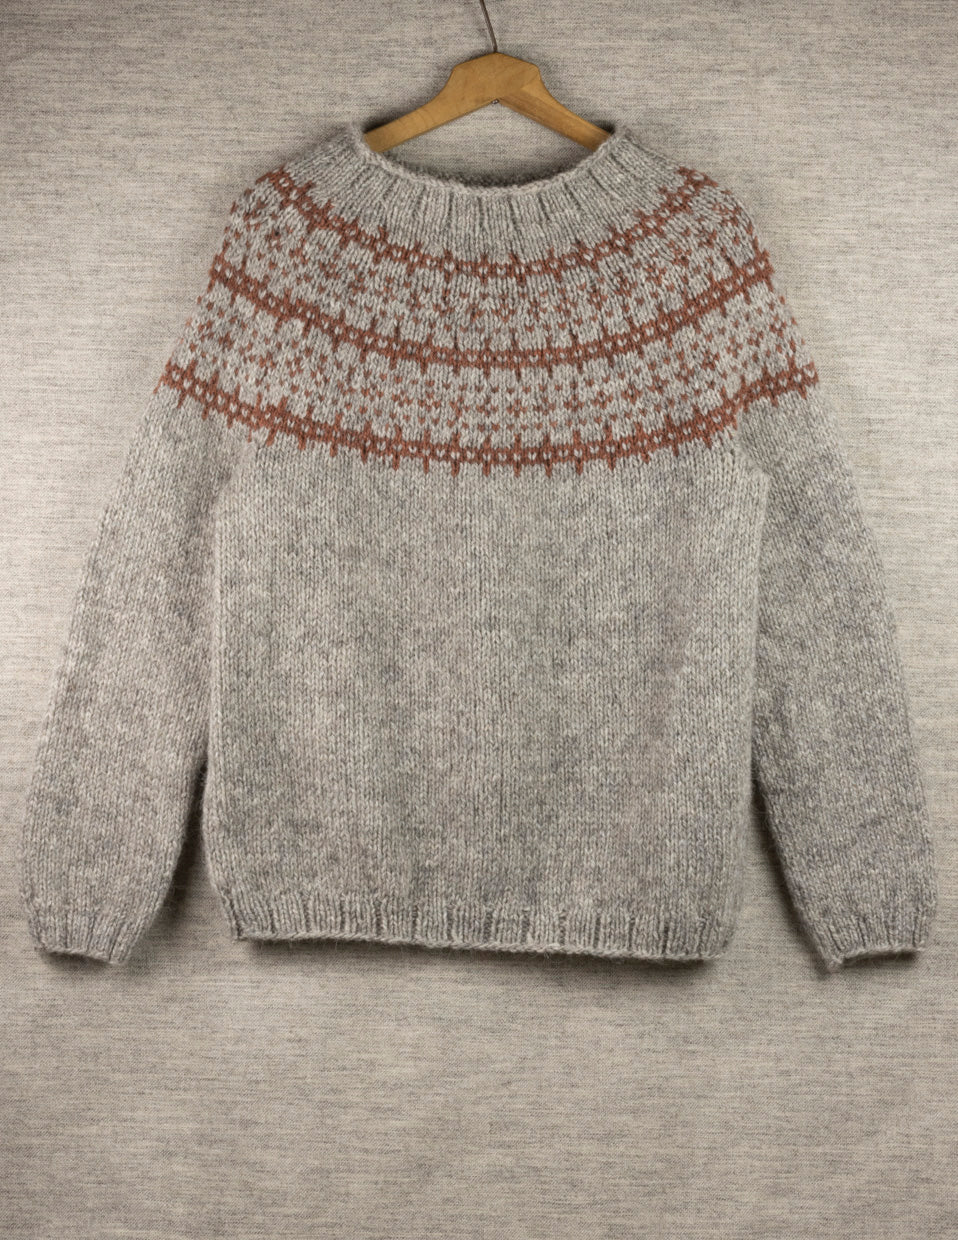 Salty Grains sweater knitting kit in STORM